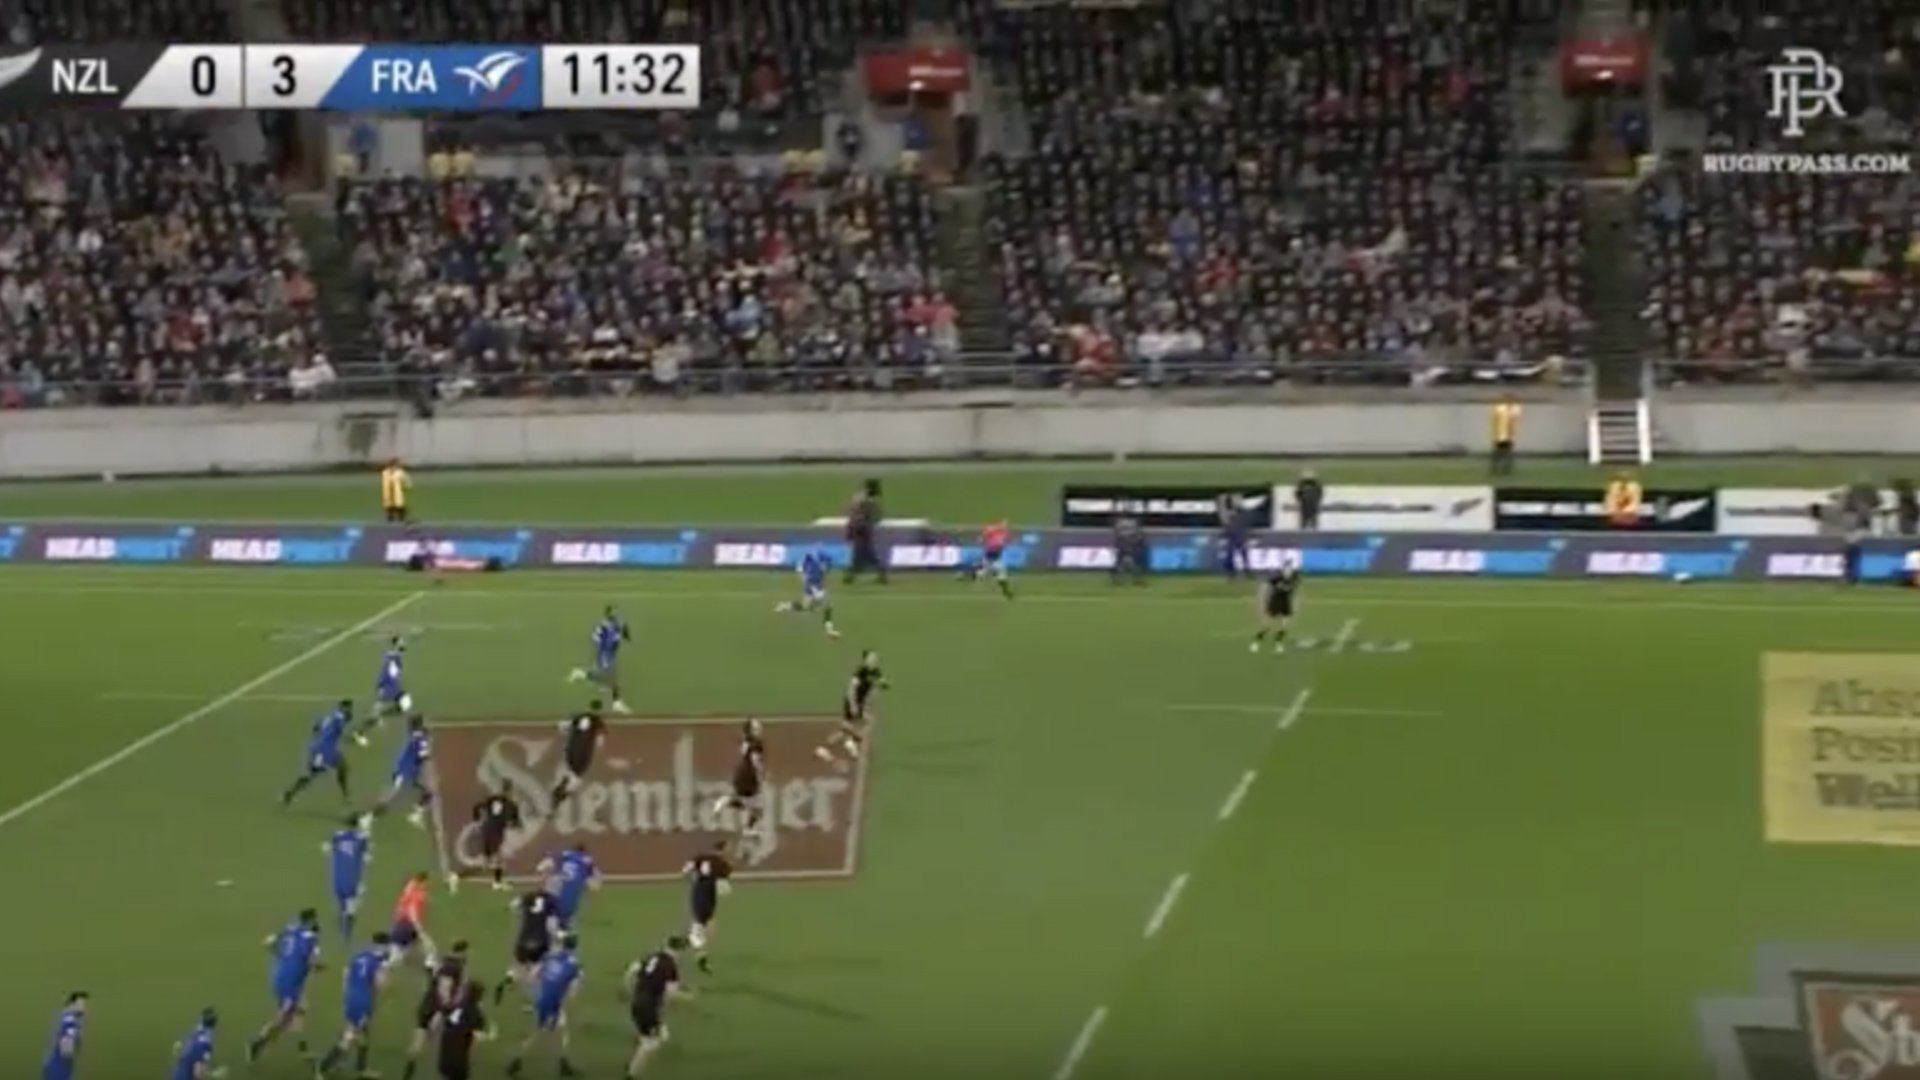 WATCH: Ridiculous red card hijacks French chances against the All Blacks